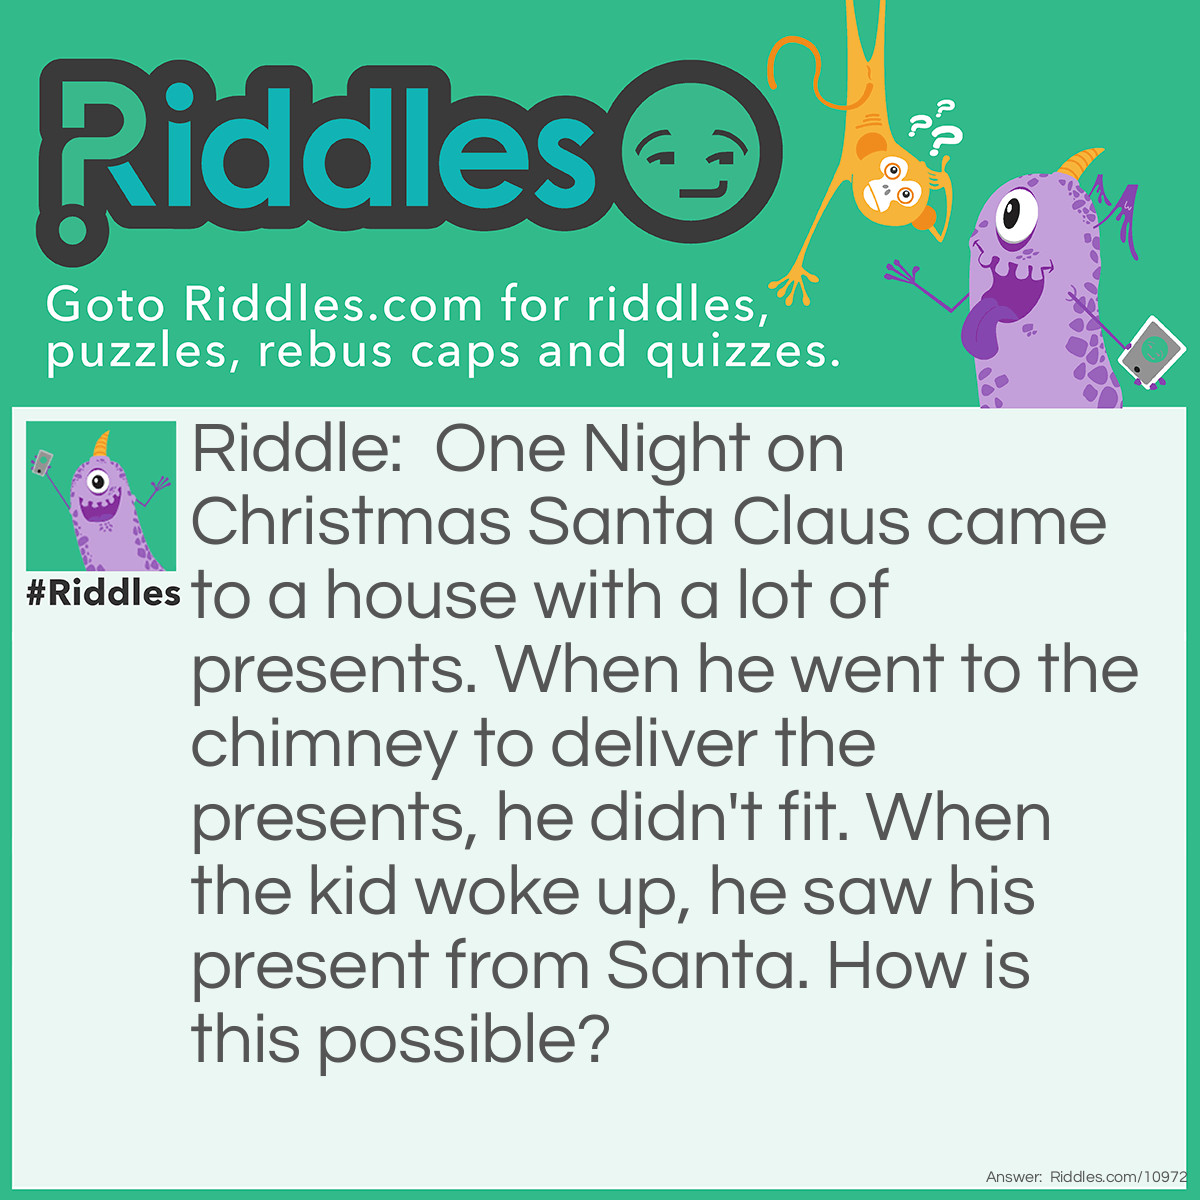 Riddle: One Night on <a href="https://www.riddles.com/quiz/christmas-riddles">Christmas</a> Santa Claus came to a house with a lot of presents. When he went to the chimney to deliver the presents, he didn't fit. When the kid woke up, he saw his present from Santa. How is this possible? Answer: It was not Santa. It was the kid's parents.